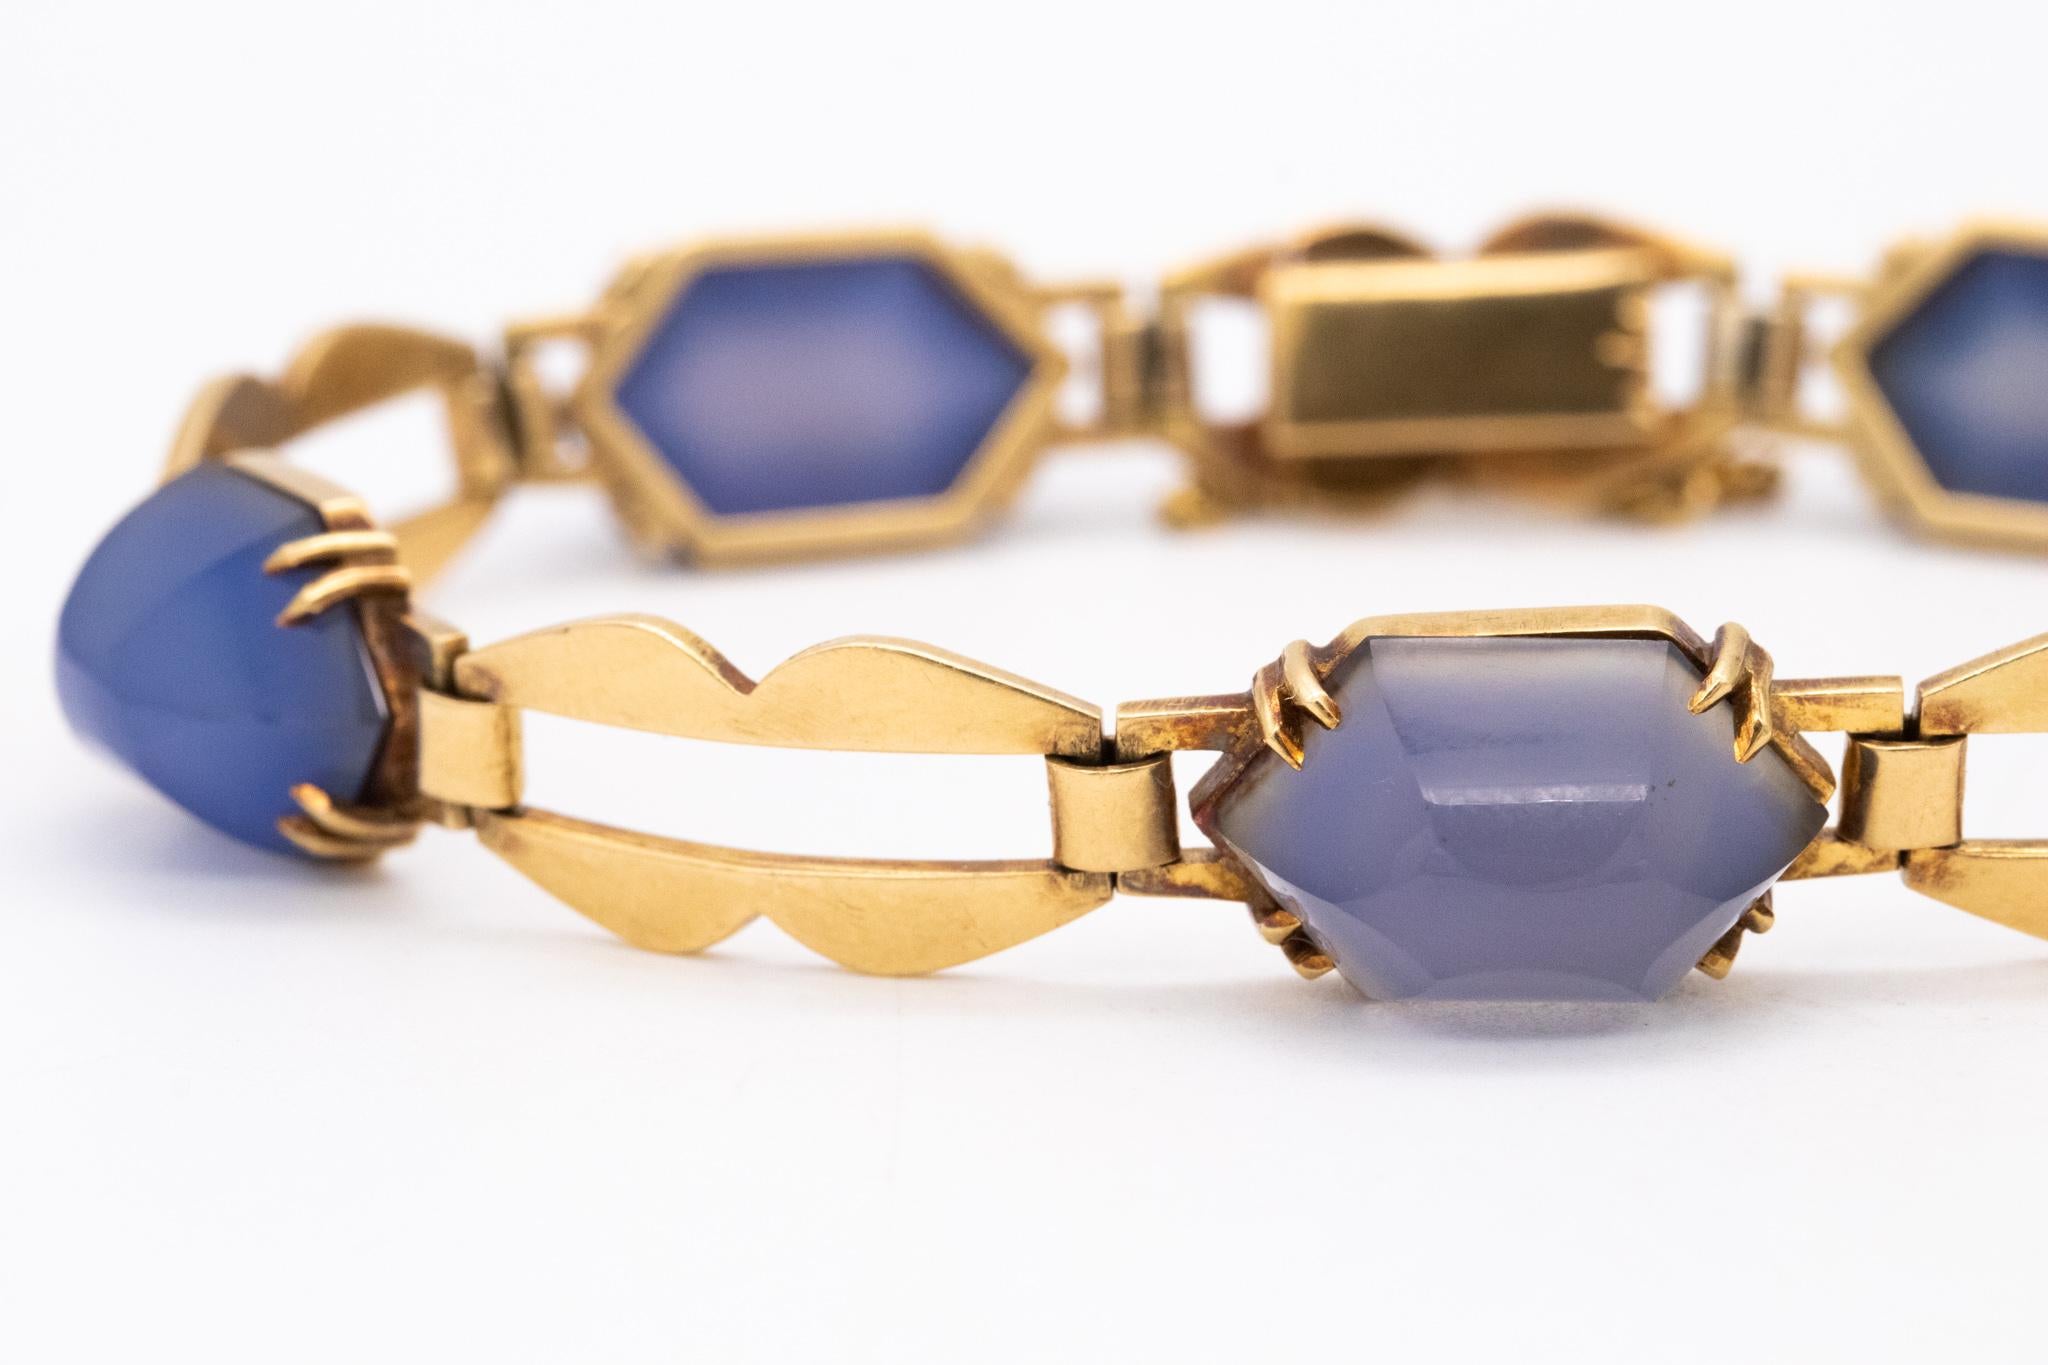 French 1930 Art Deco Bracelet In 18Kt Yellow Gold With 35 Cts Of Blue Chalcedony For Sale 3